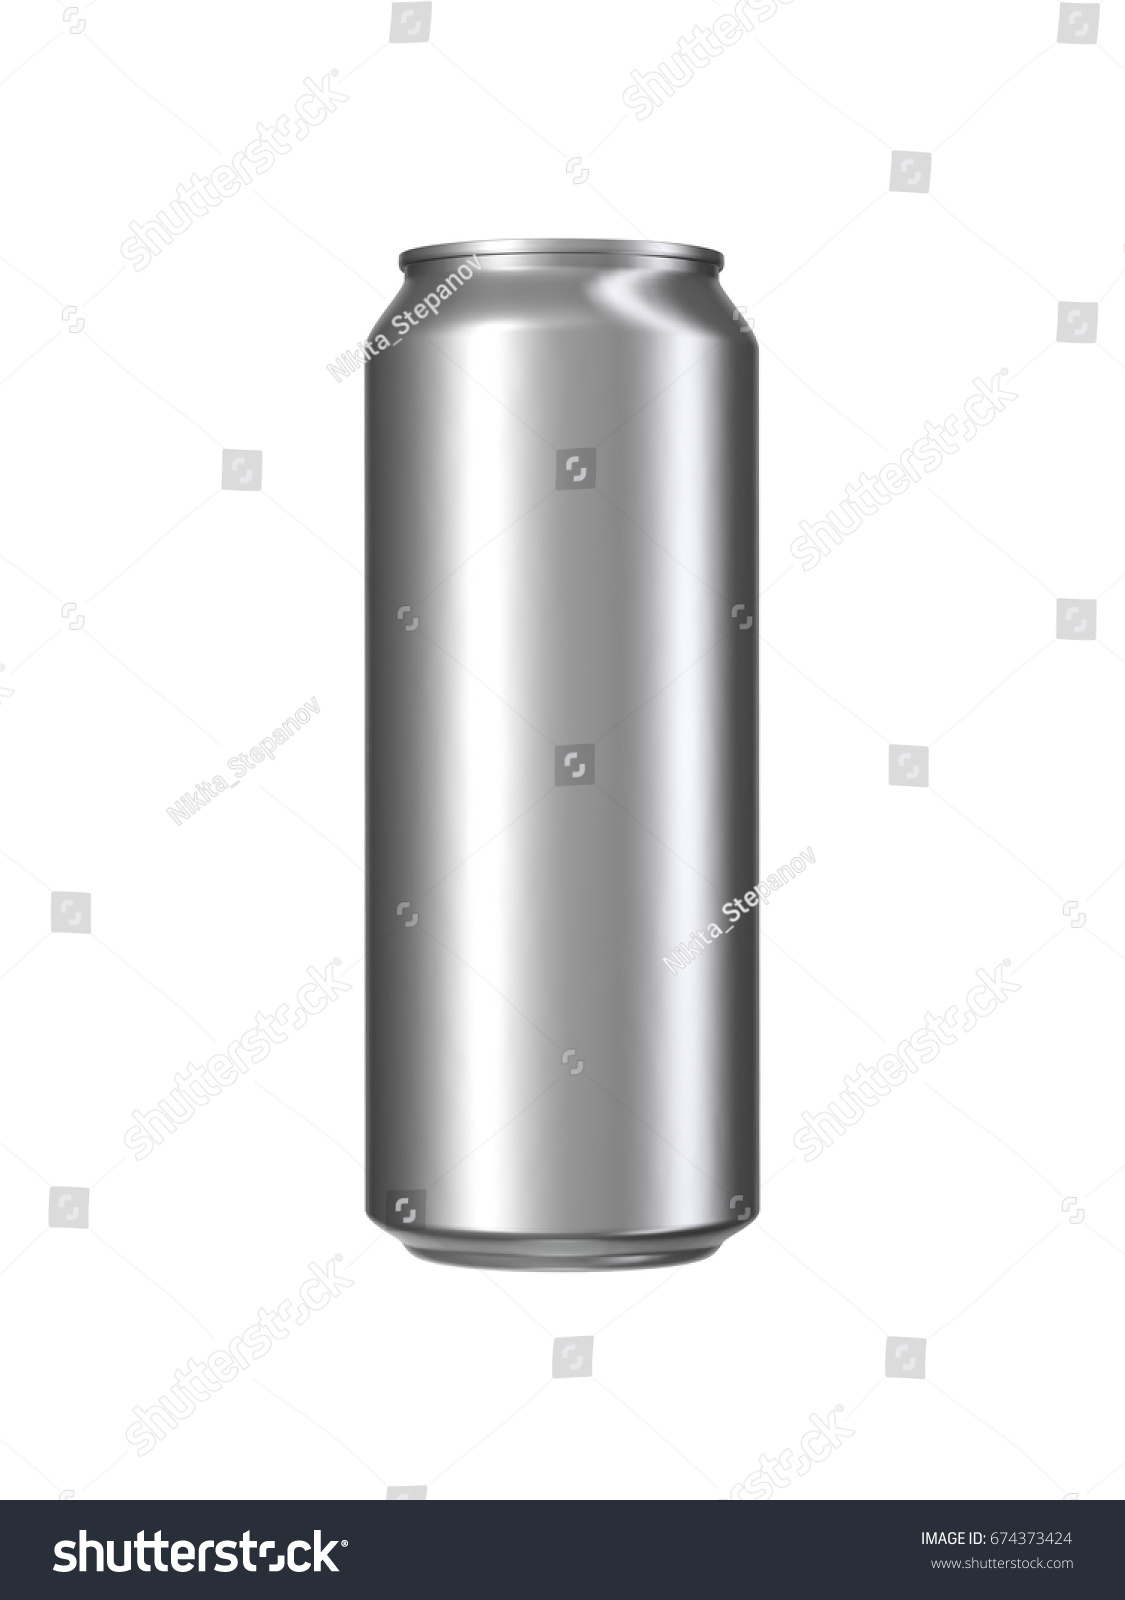 Aluminium can without print, 3d visualization. #674373424